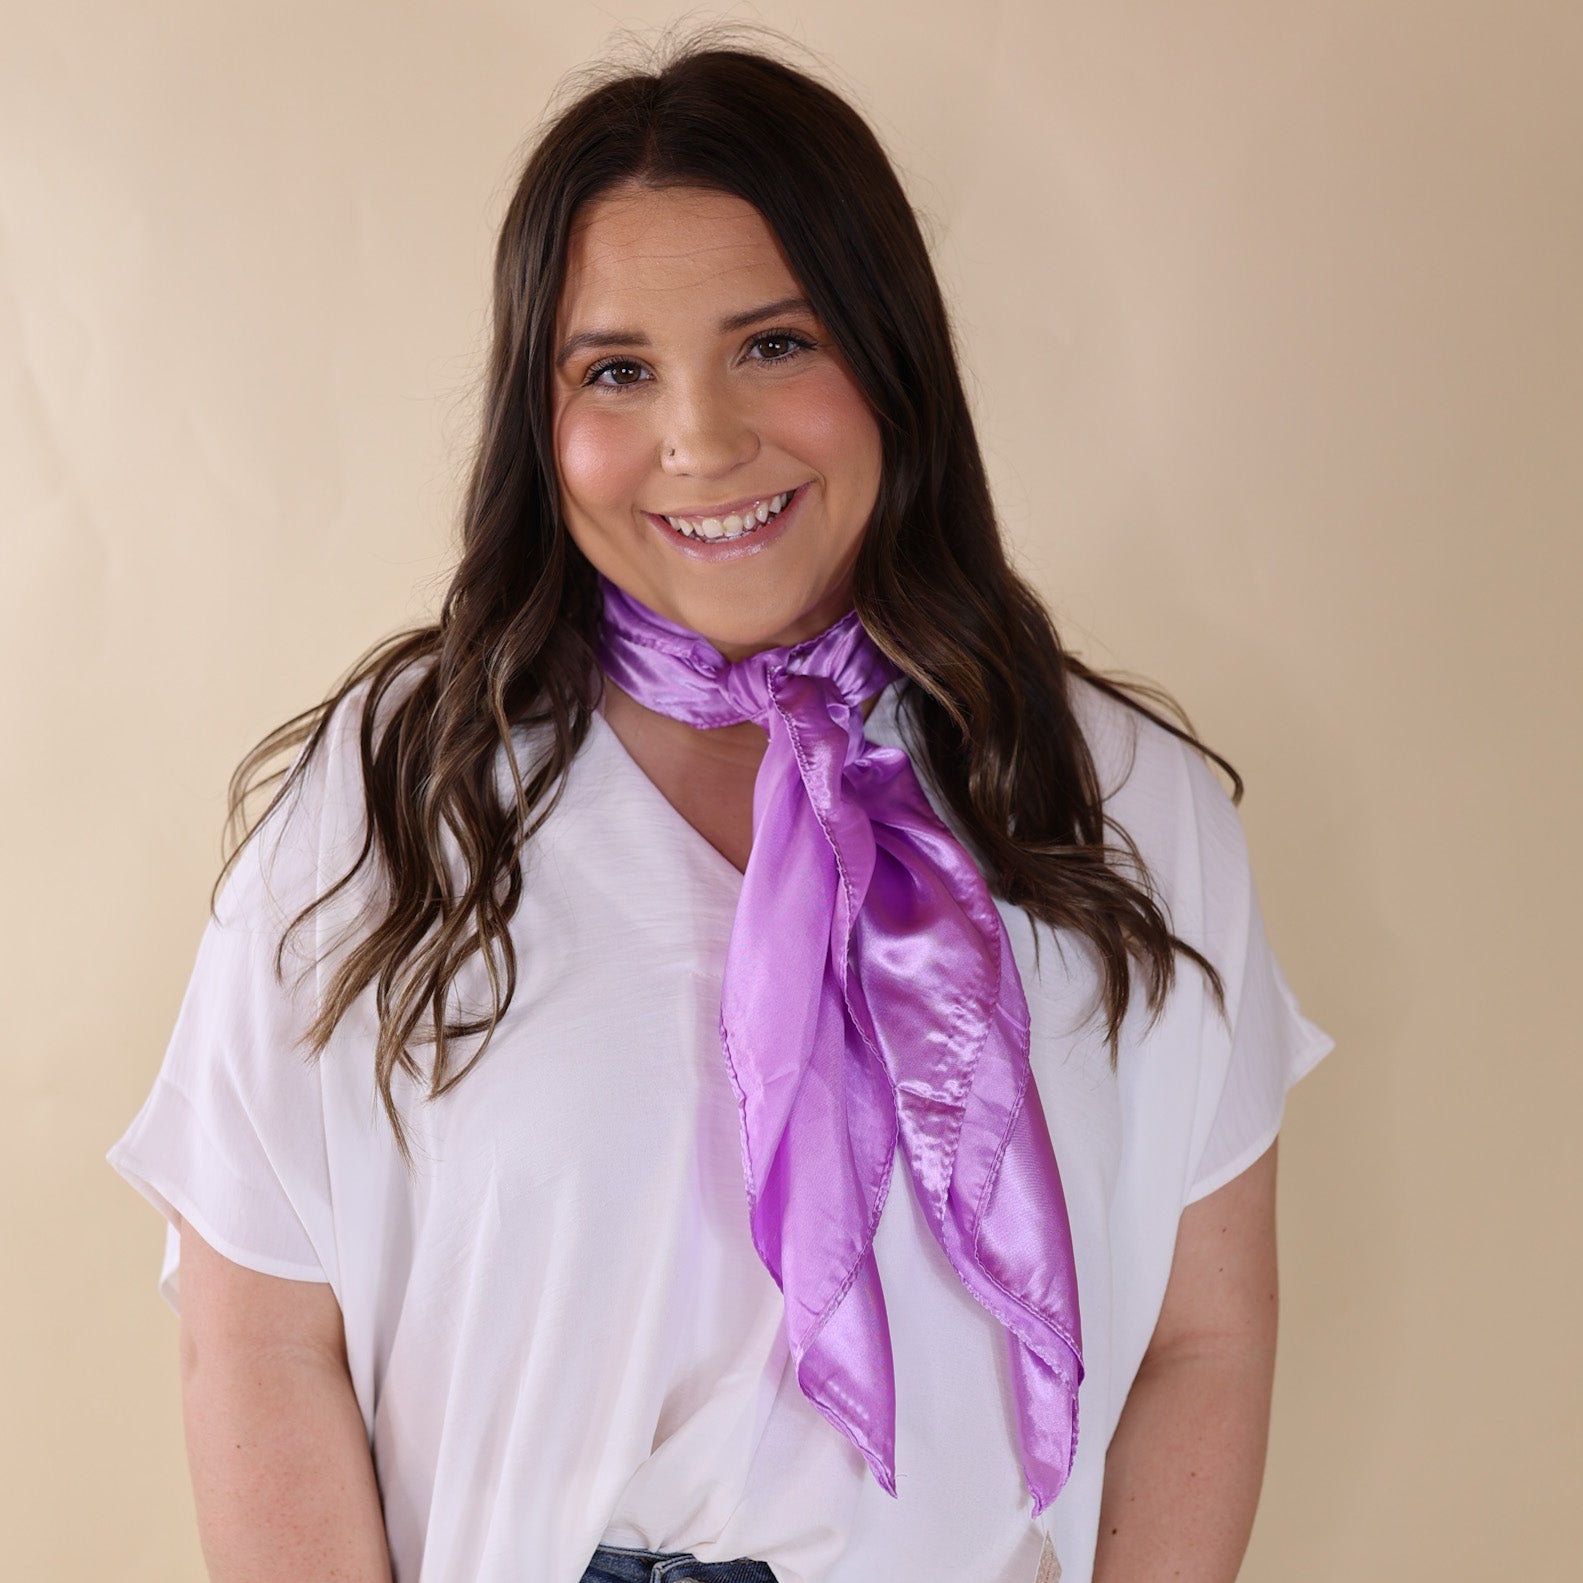 Brunette model is wearing a white drop shoulder top with a pastel purple scarf wrapped and tied around her neck. She is pictured in front of a beige background.